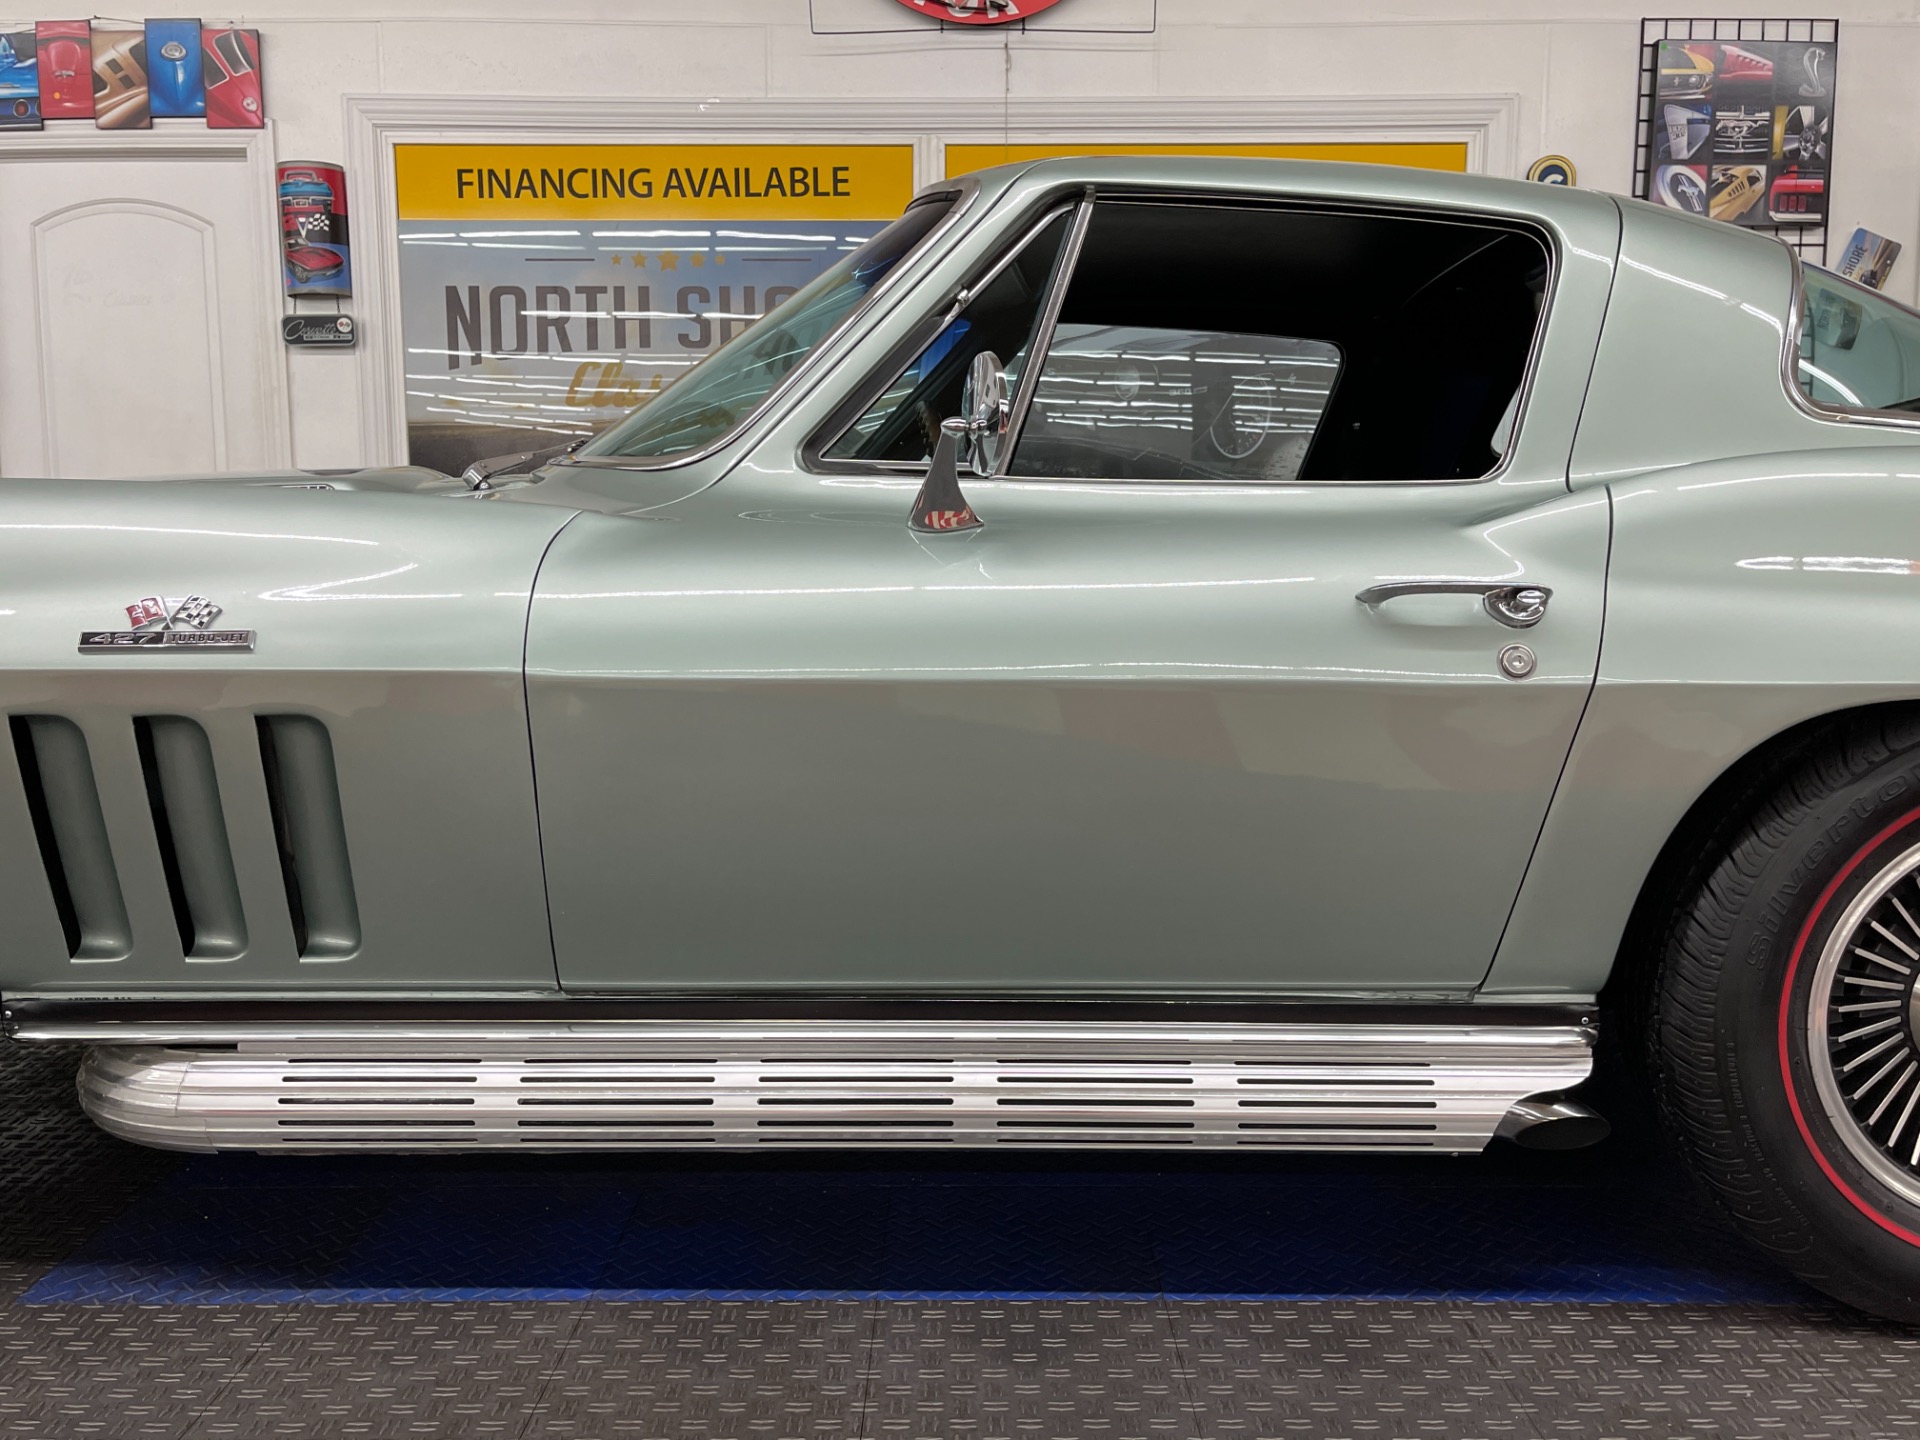 Used 1966 Chevrolet Corvette - MOSPORT GREEN COUPE - 390 HP 427 ENGINE - 4 SPEED - SEE VIDEO | Mundelein, IL